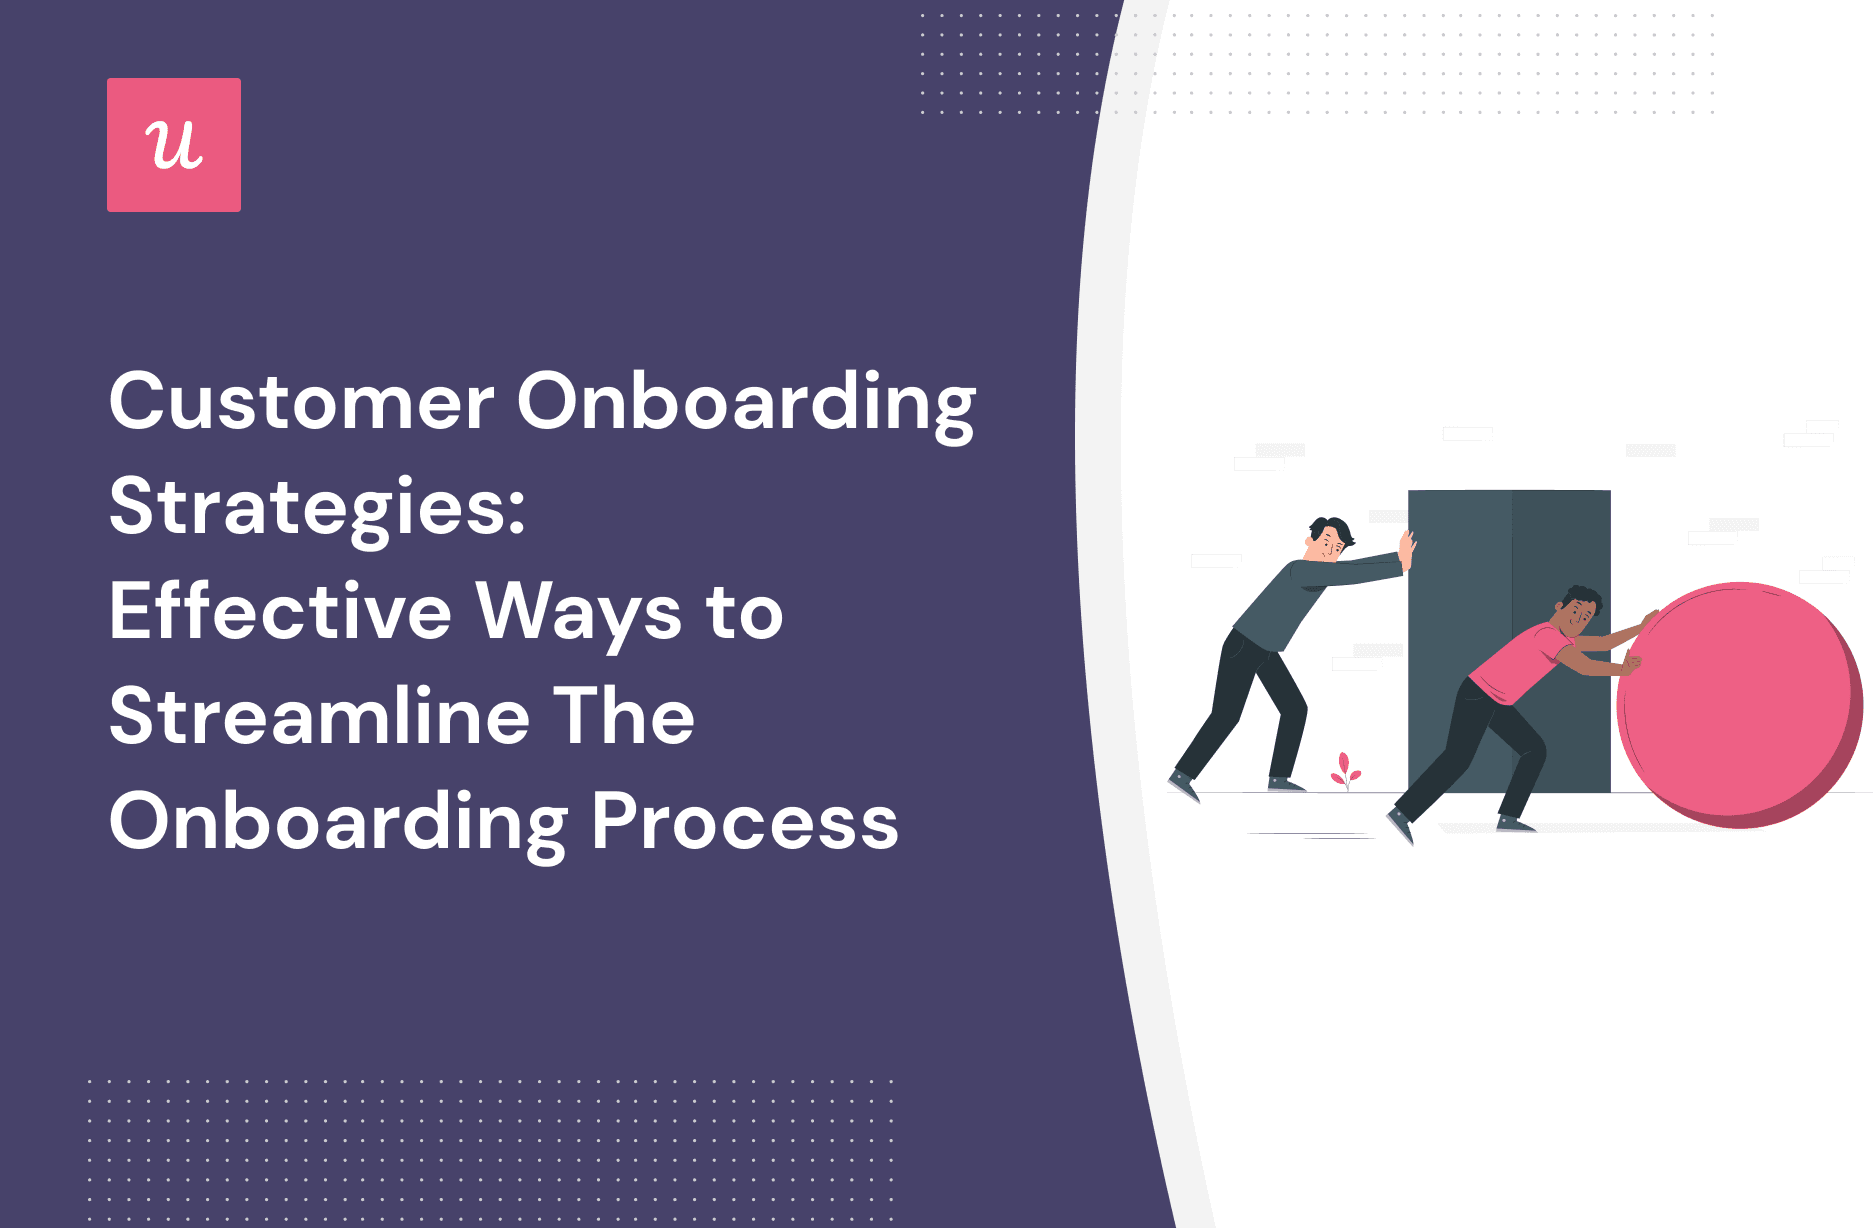 Customer Onboarding Strategies: Effective Ways to Streamline the Onboarding Process cover